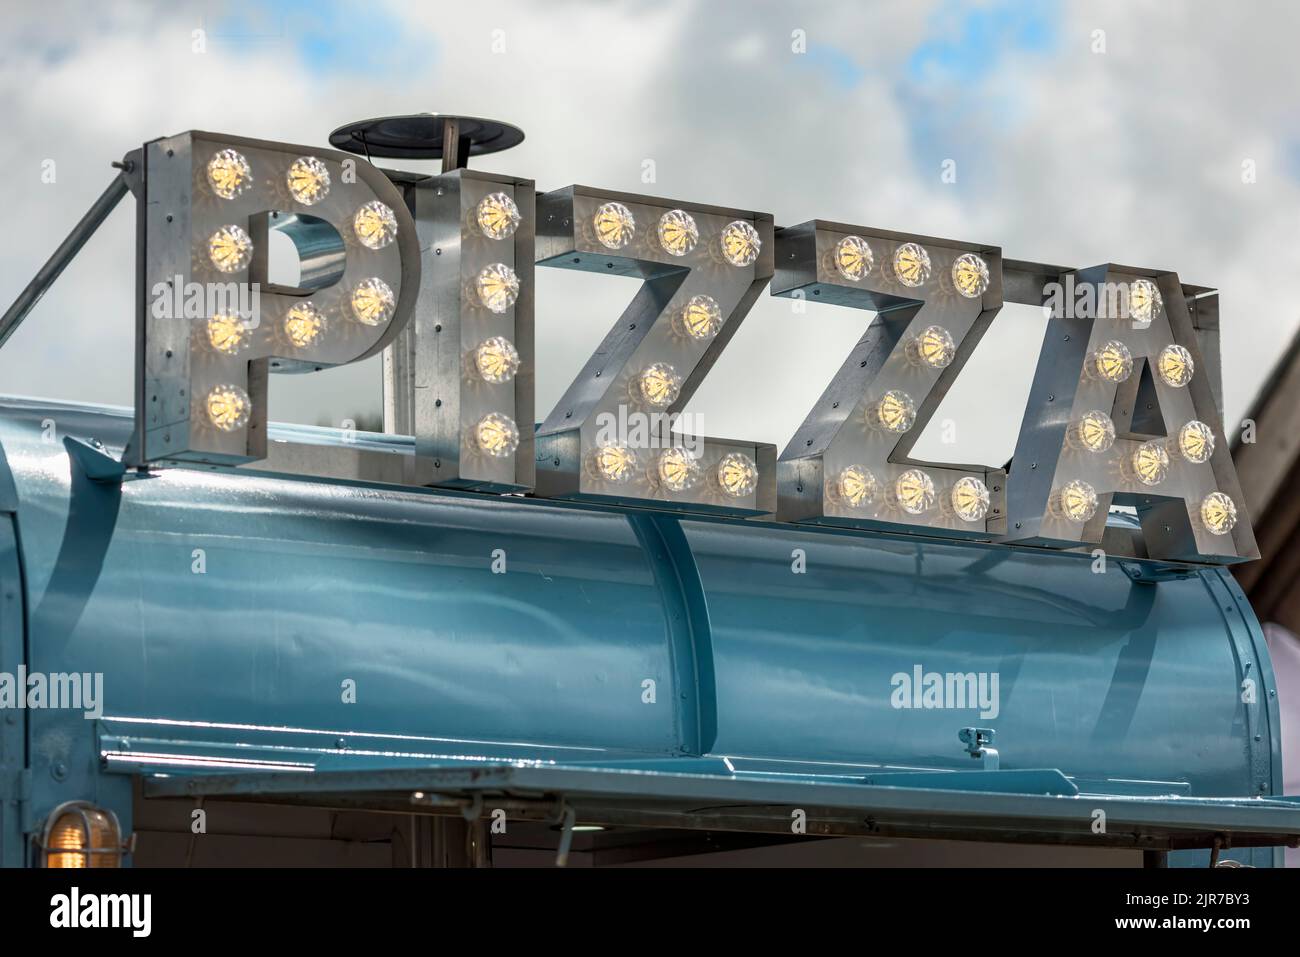 An LED illuminated Pizza sign on top of an outdoor food vendors stall. Stock Photo